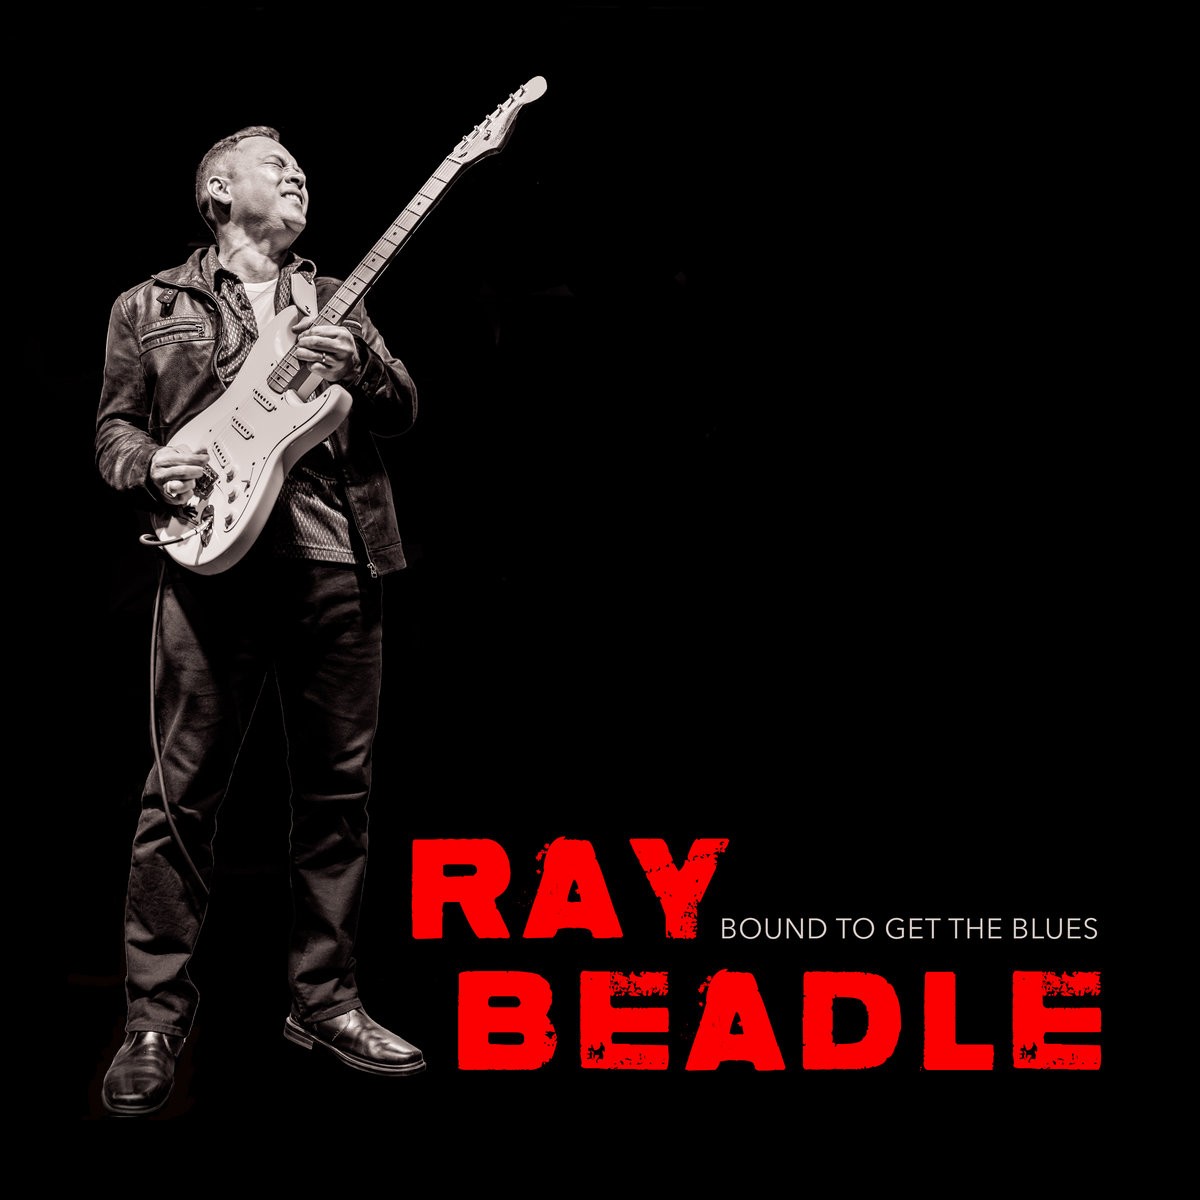 Ray Beadle - Bound To Get The Blues